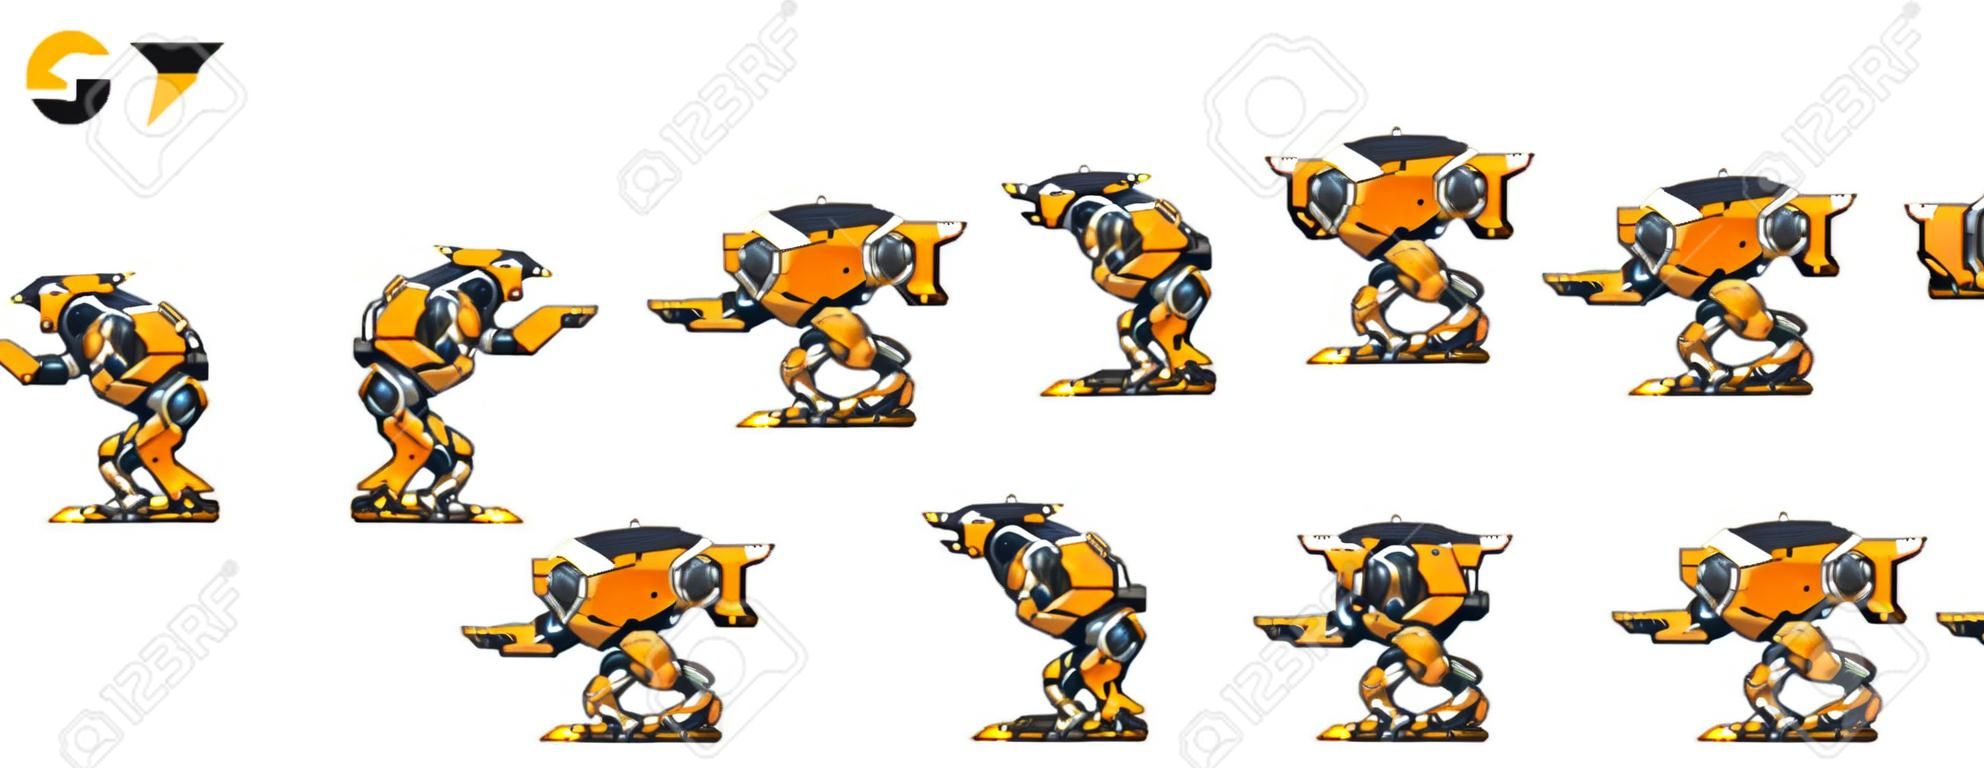 Animated enemy robot game character sprites